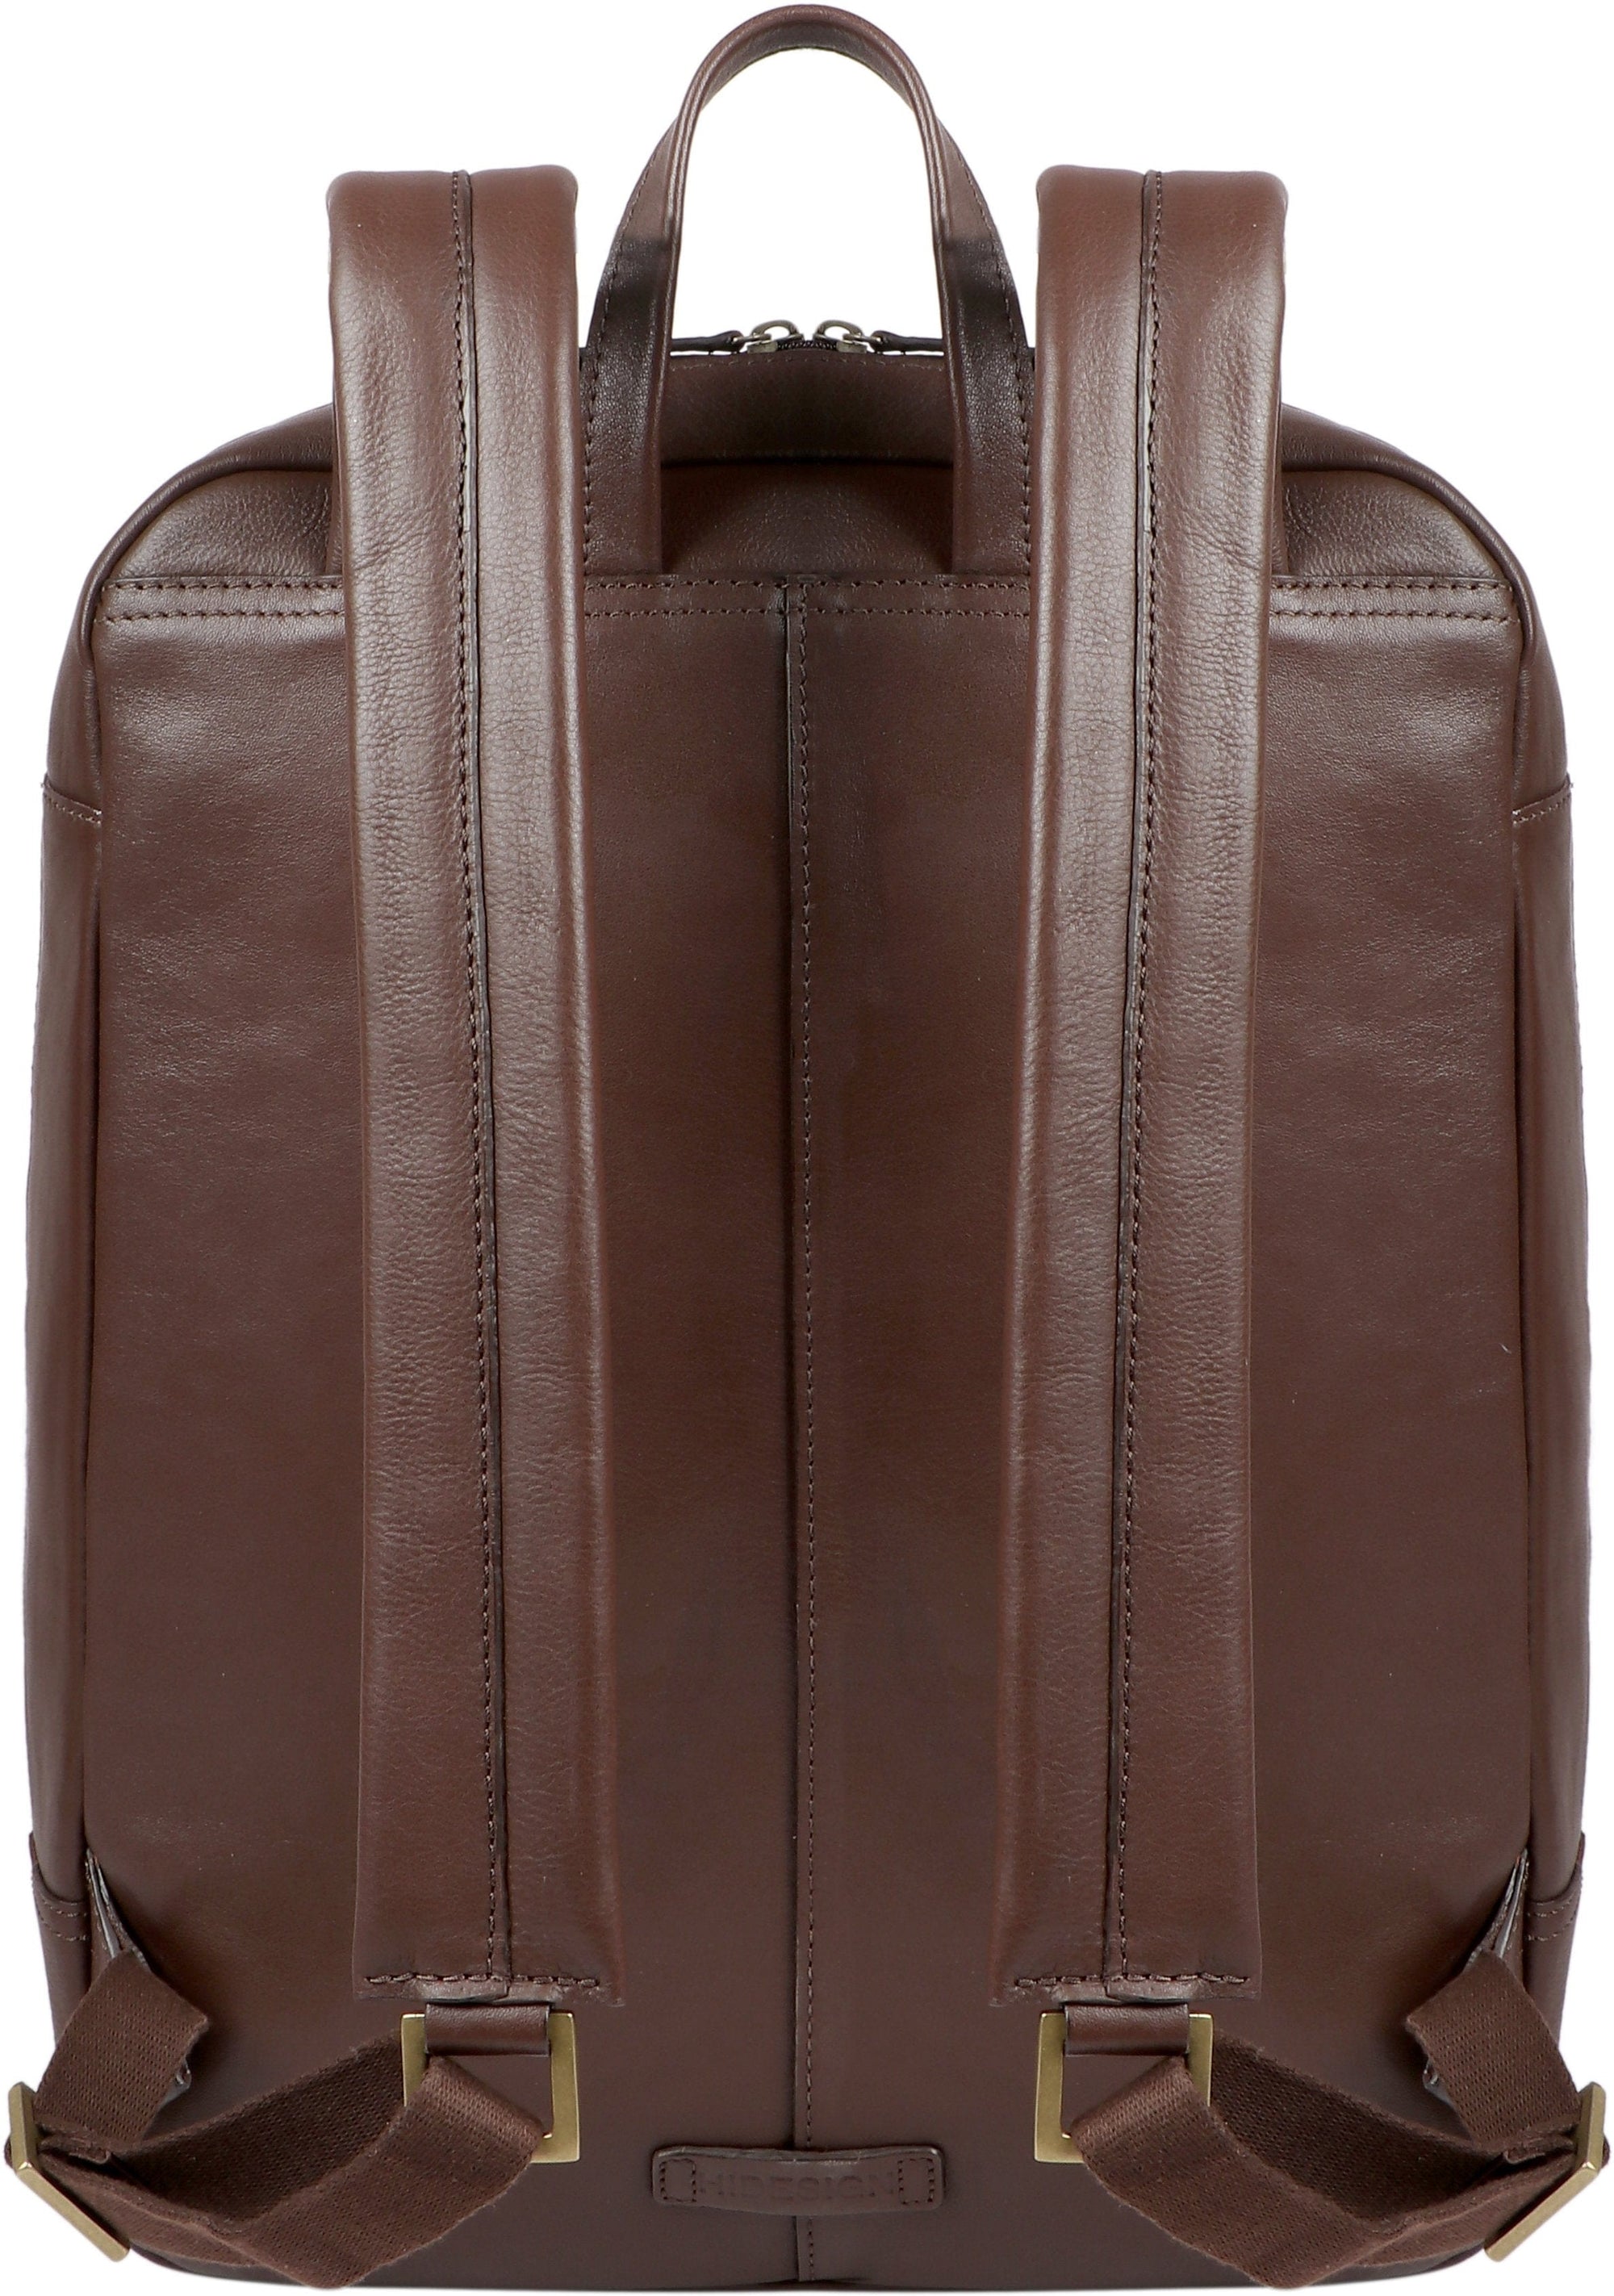 Hidesign Aiden Large Multi-Functional Leather Backpack